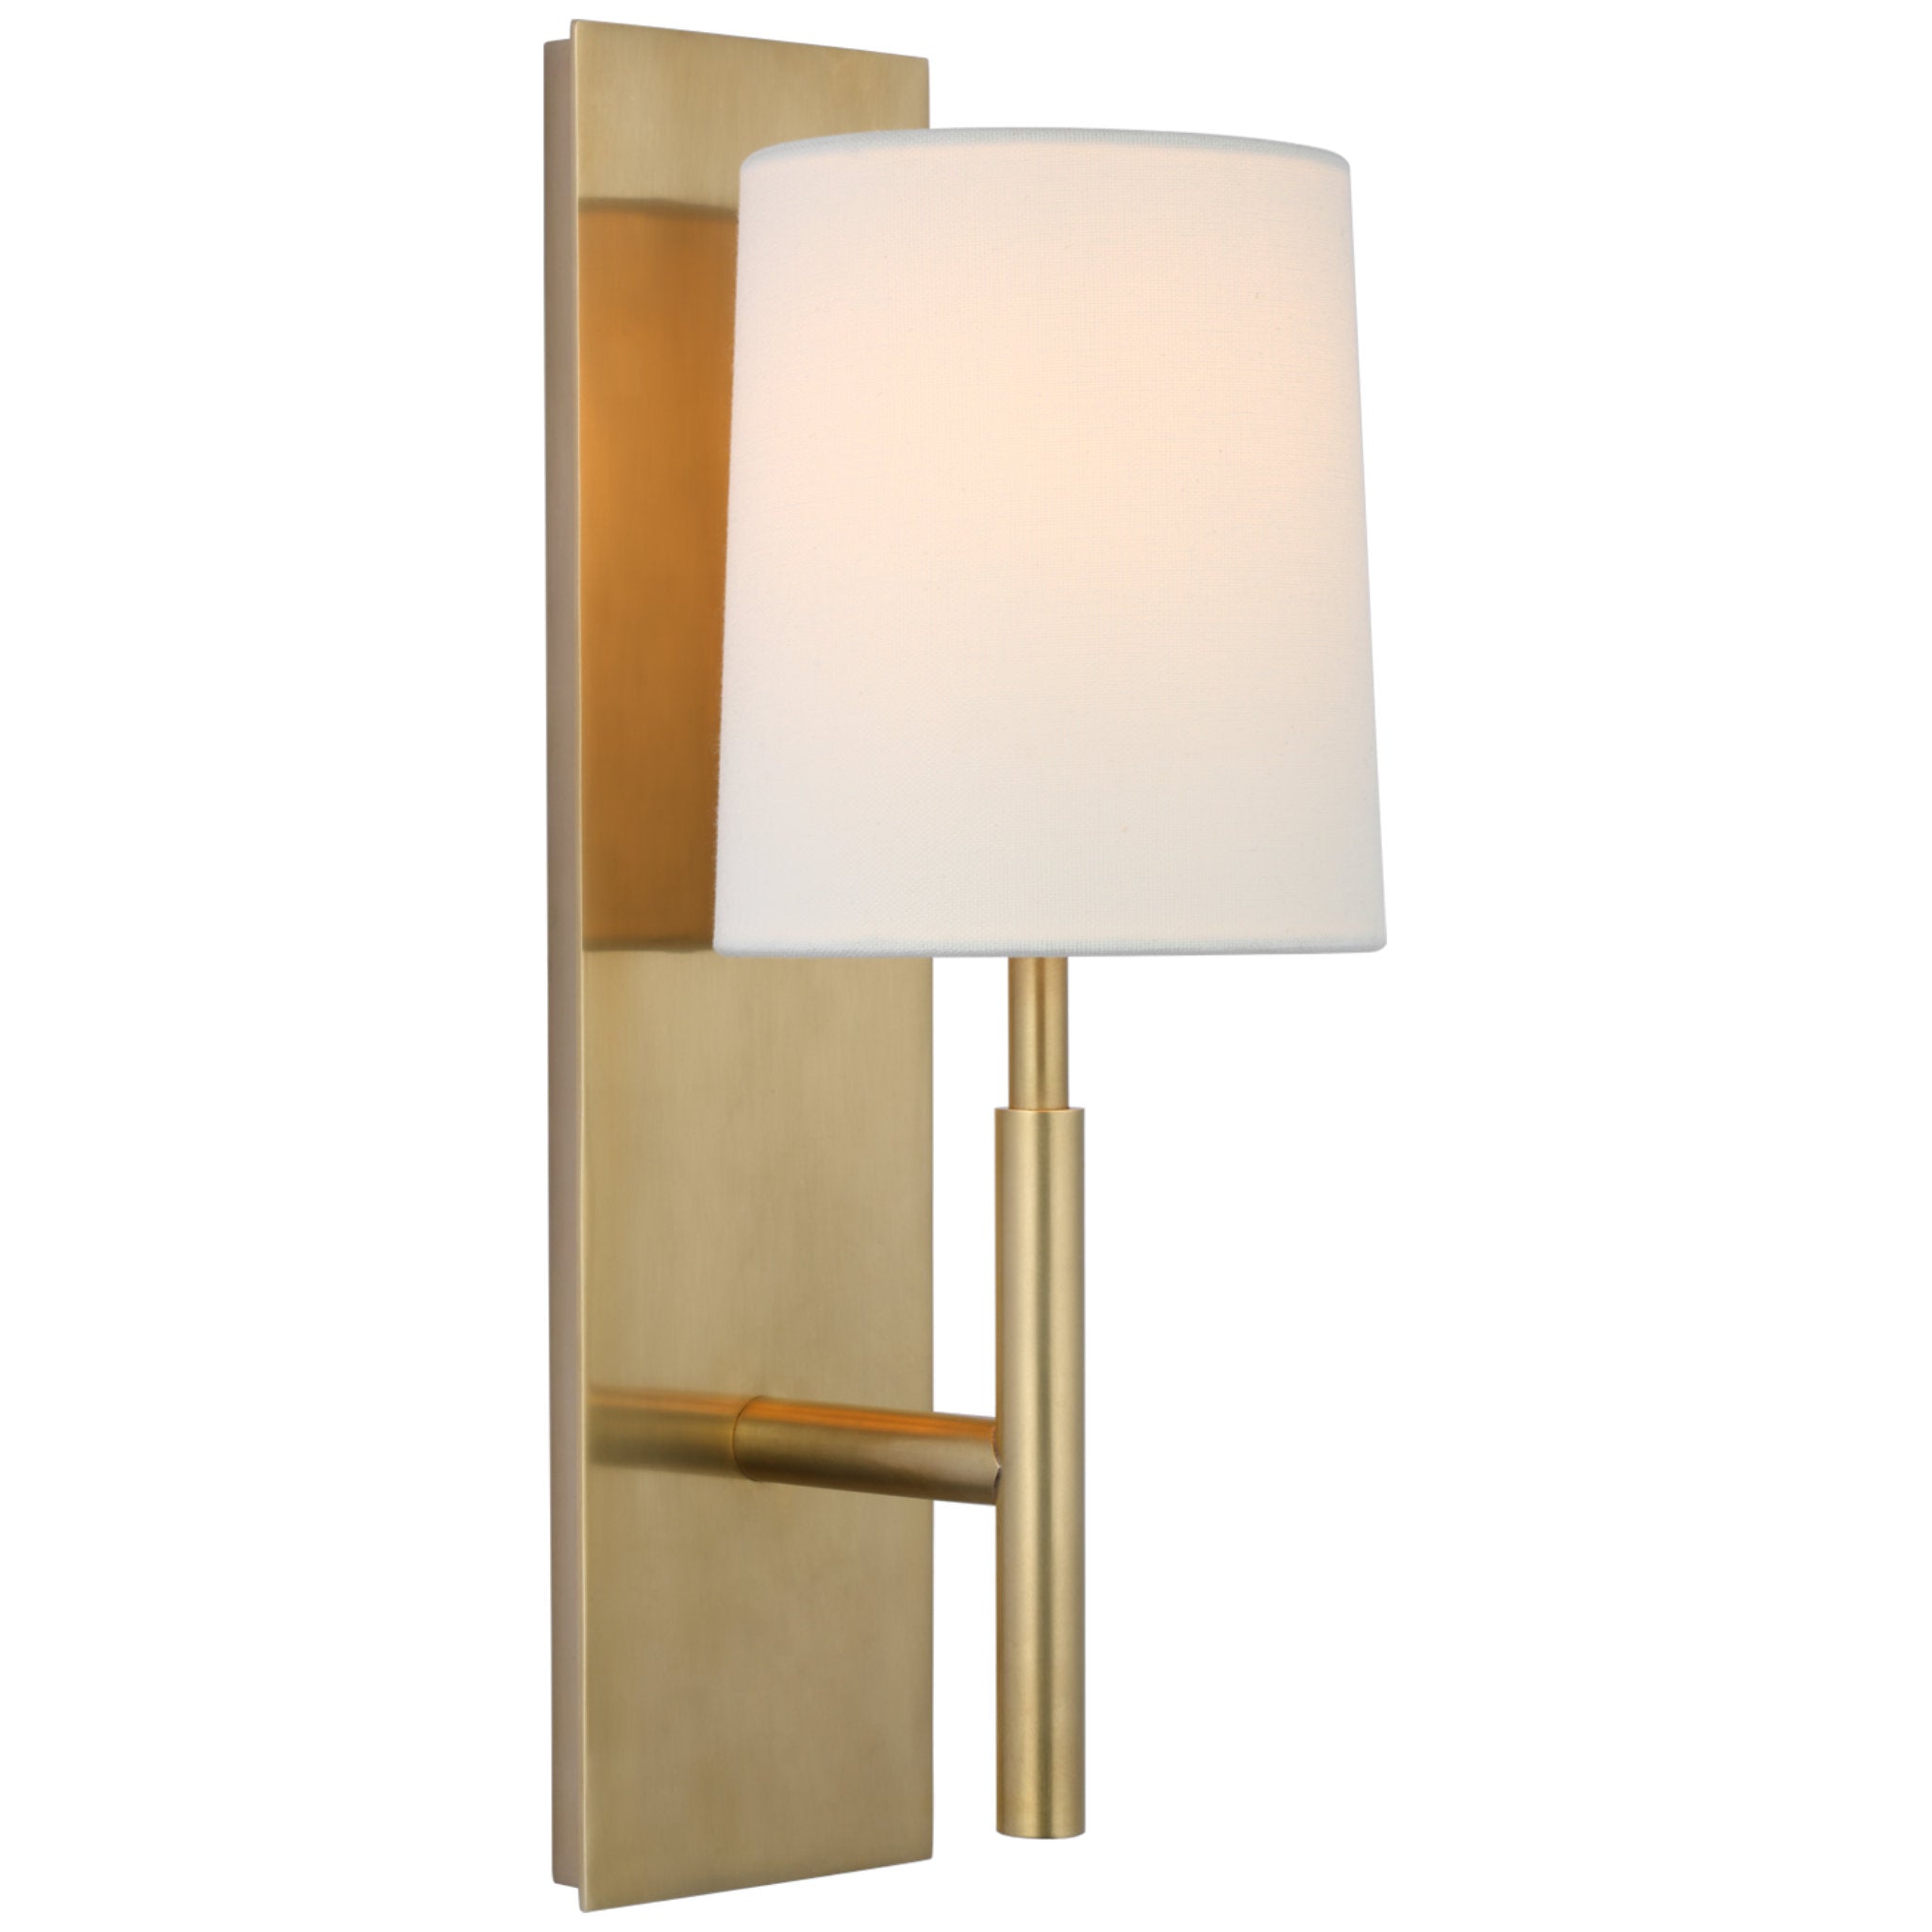 Barbara Barry Clarion Medium Sconce in Soft Brass with Linen Shade